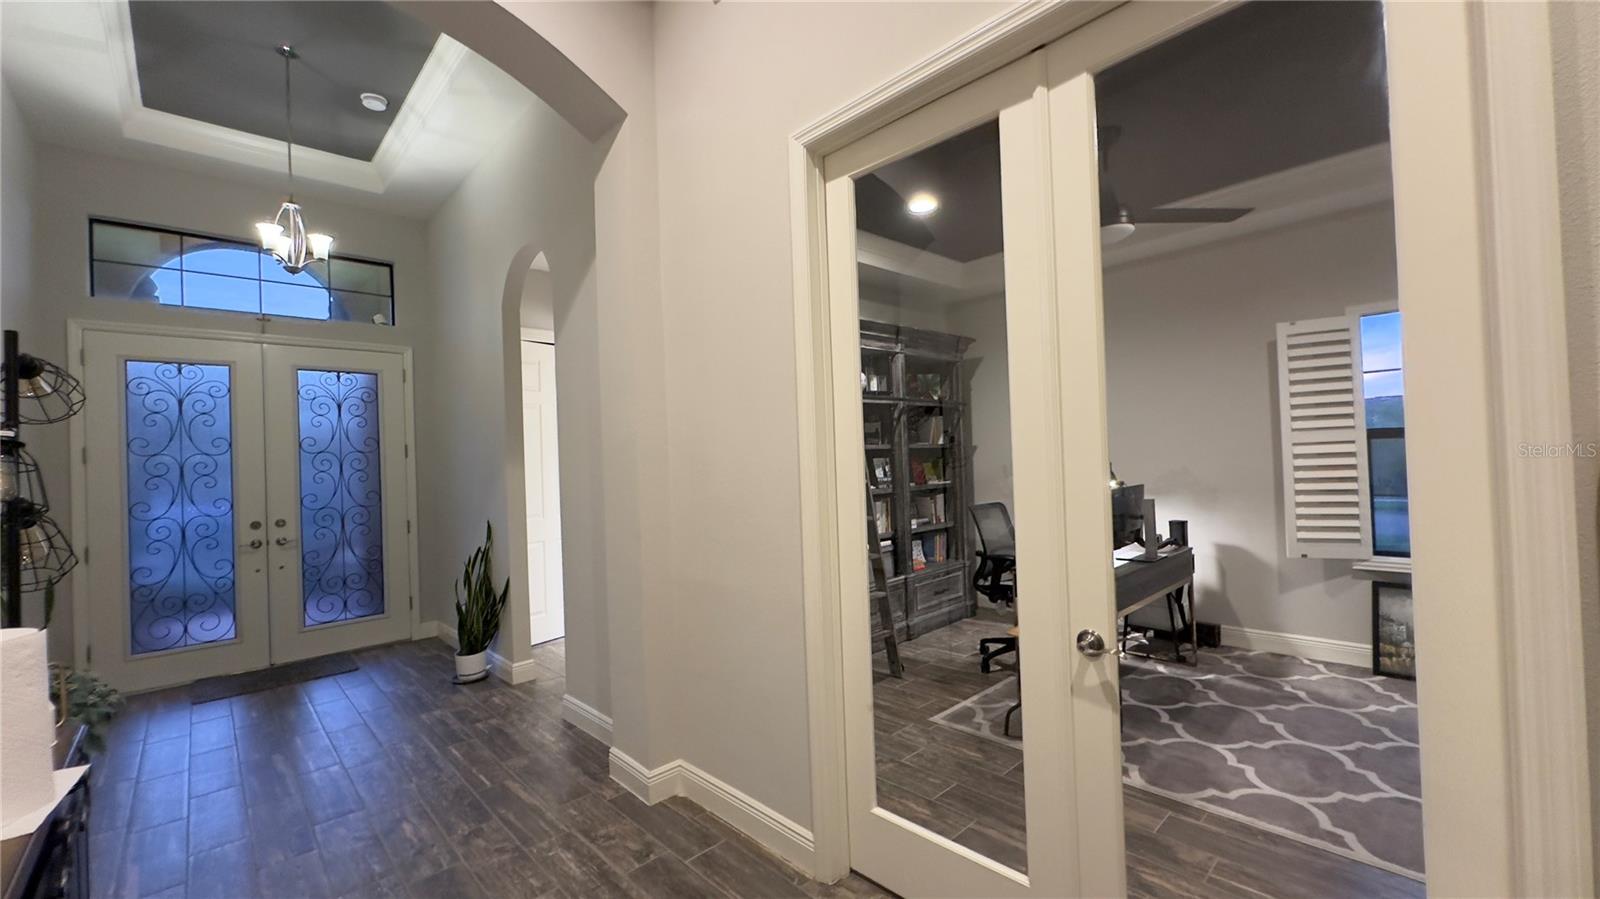 Further down the foyer, French doors give a peek to the Den/Office